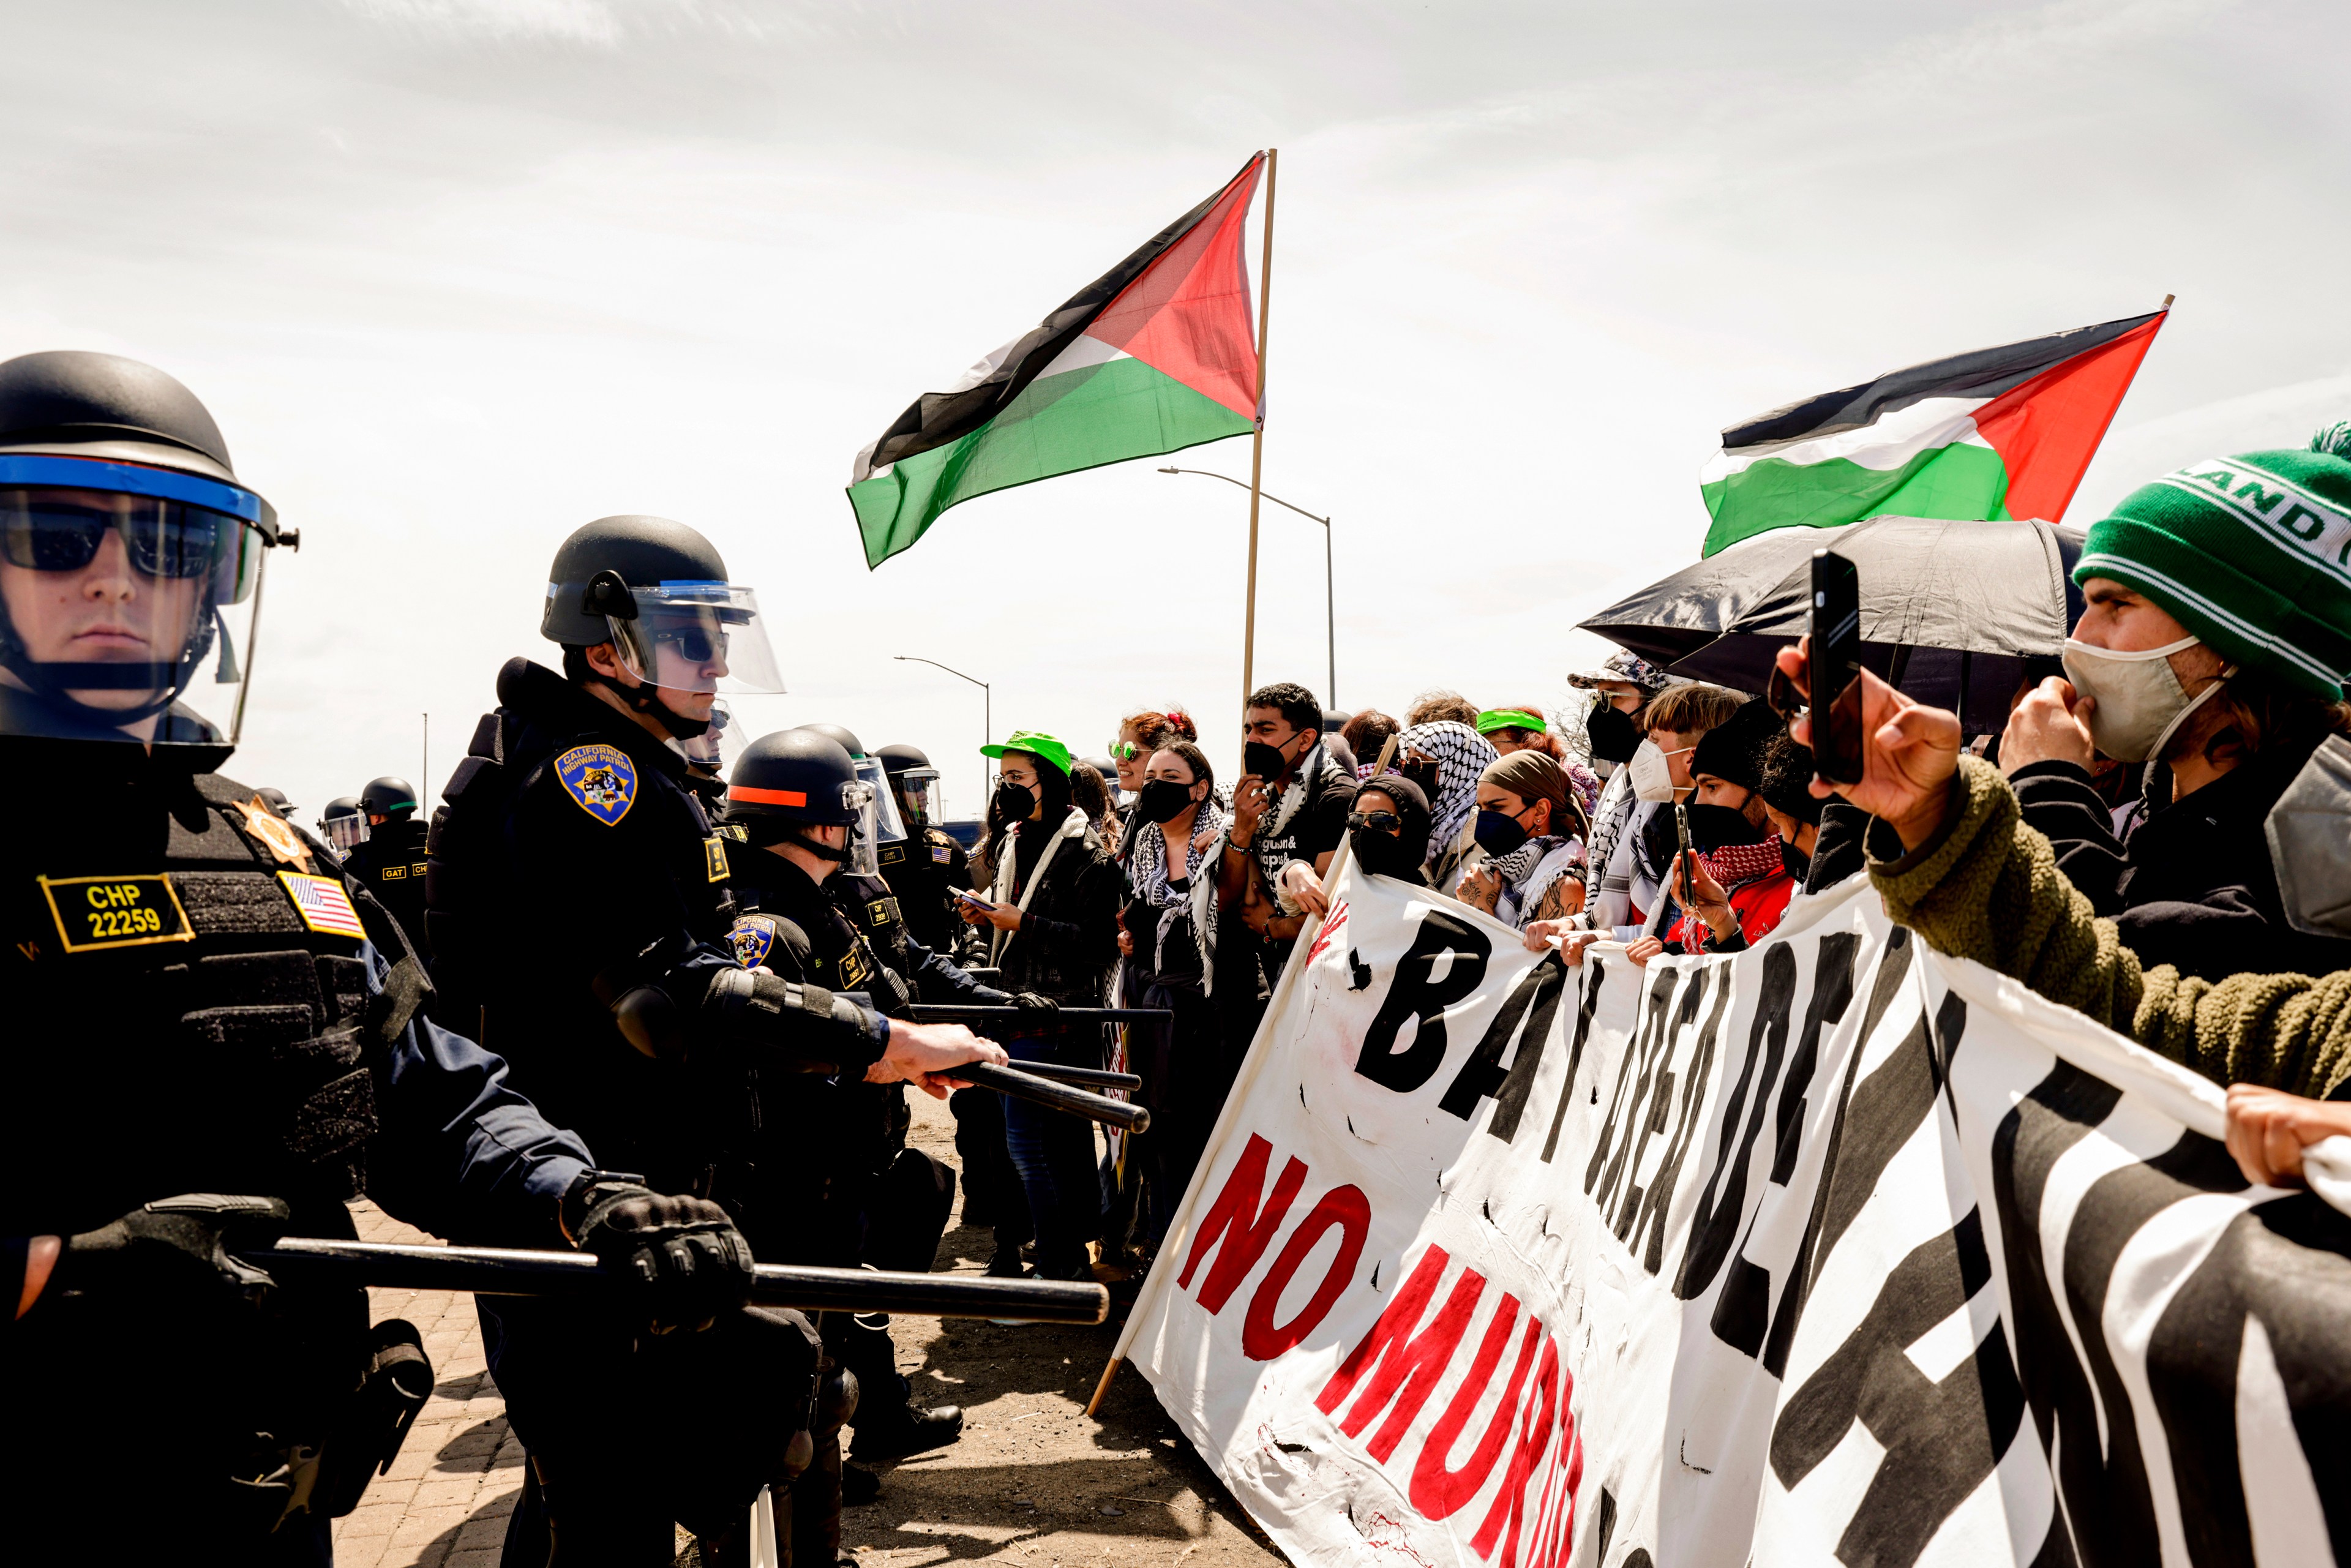 Riot police face off with protesters holding banners and a Palestinian flag.